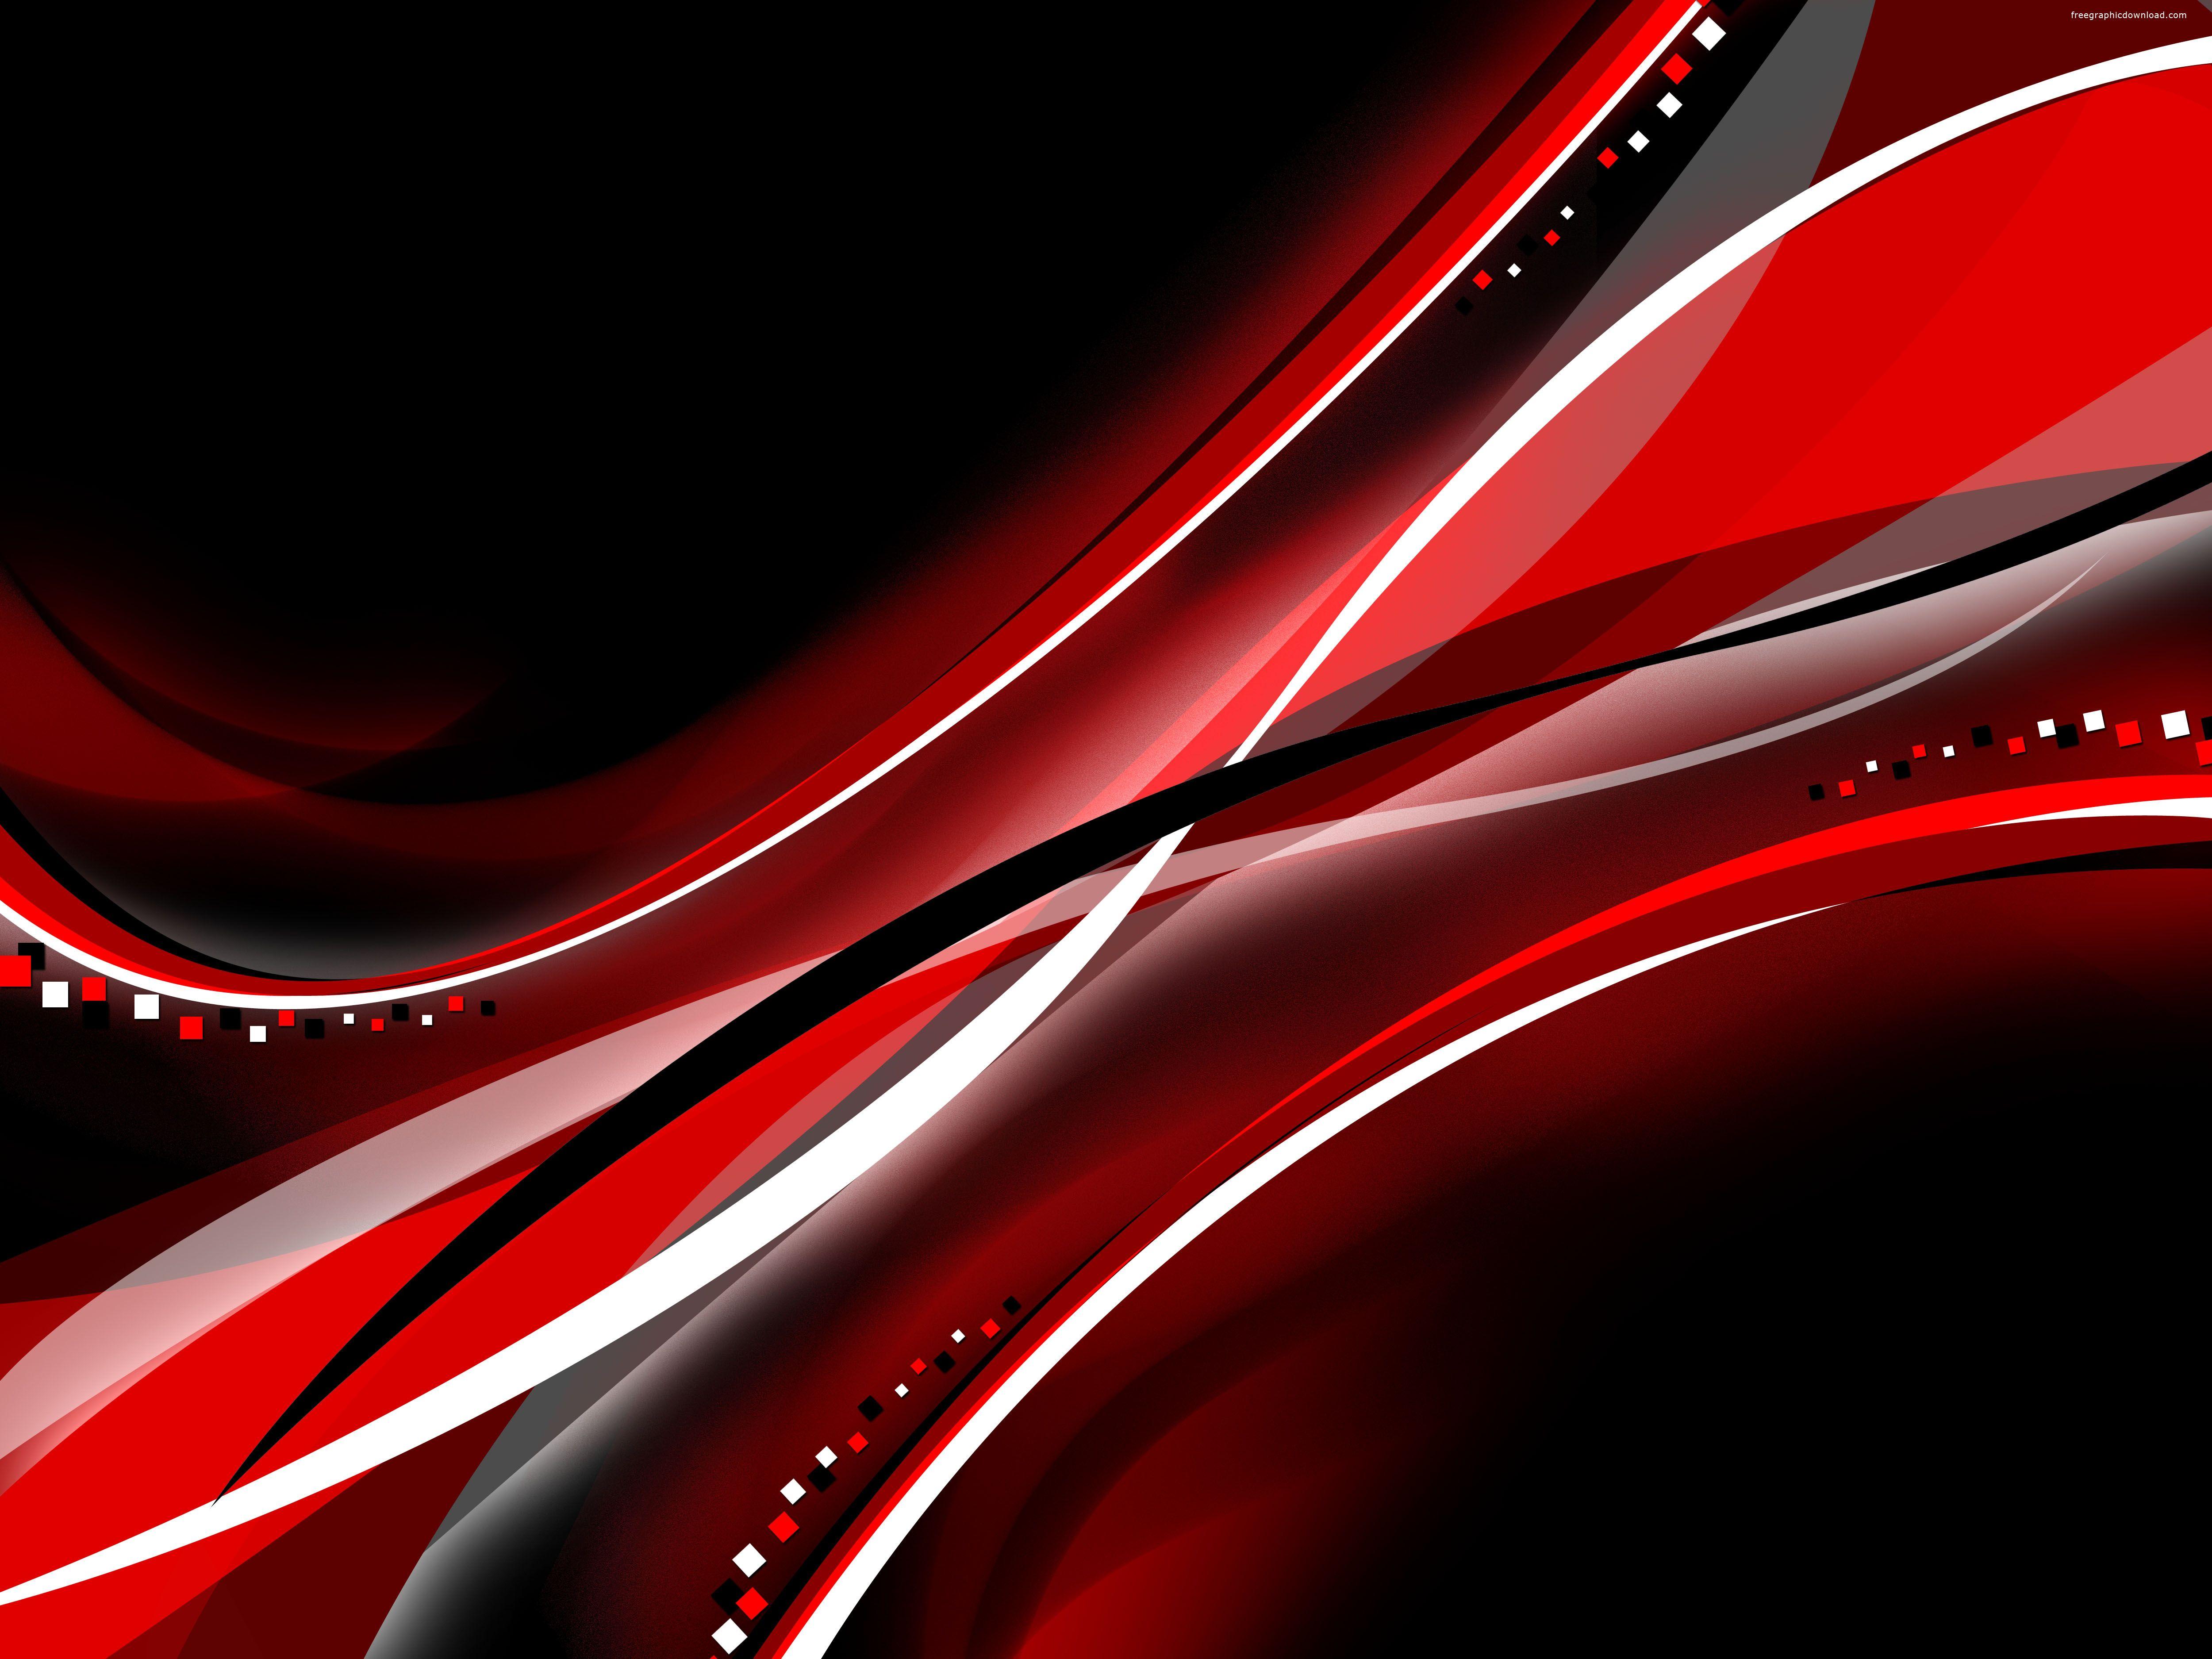 Free HD Black And Red Wallpaper. Black phone